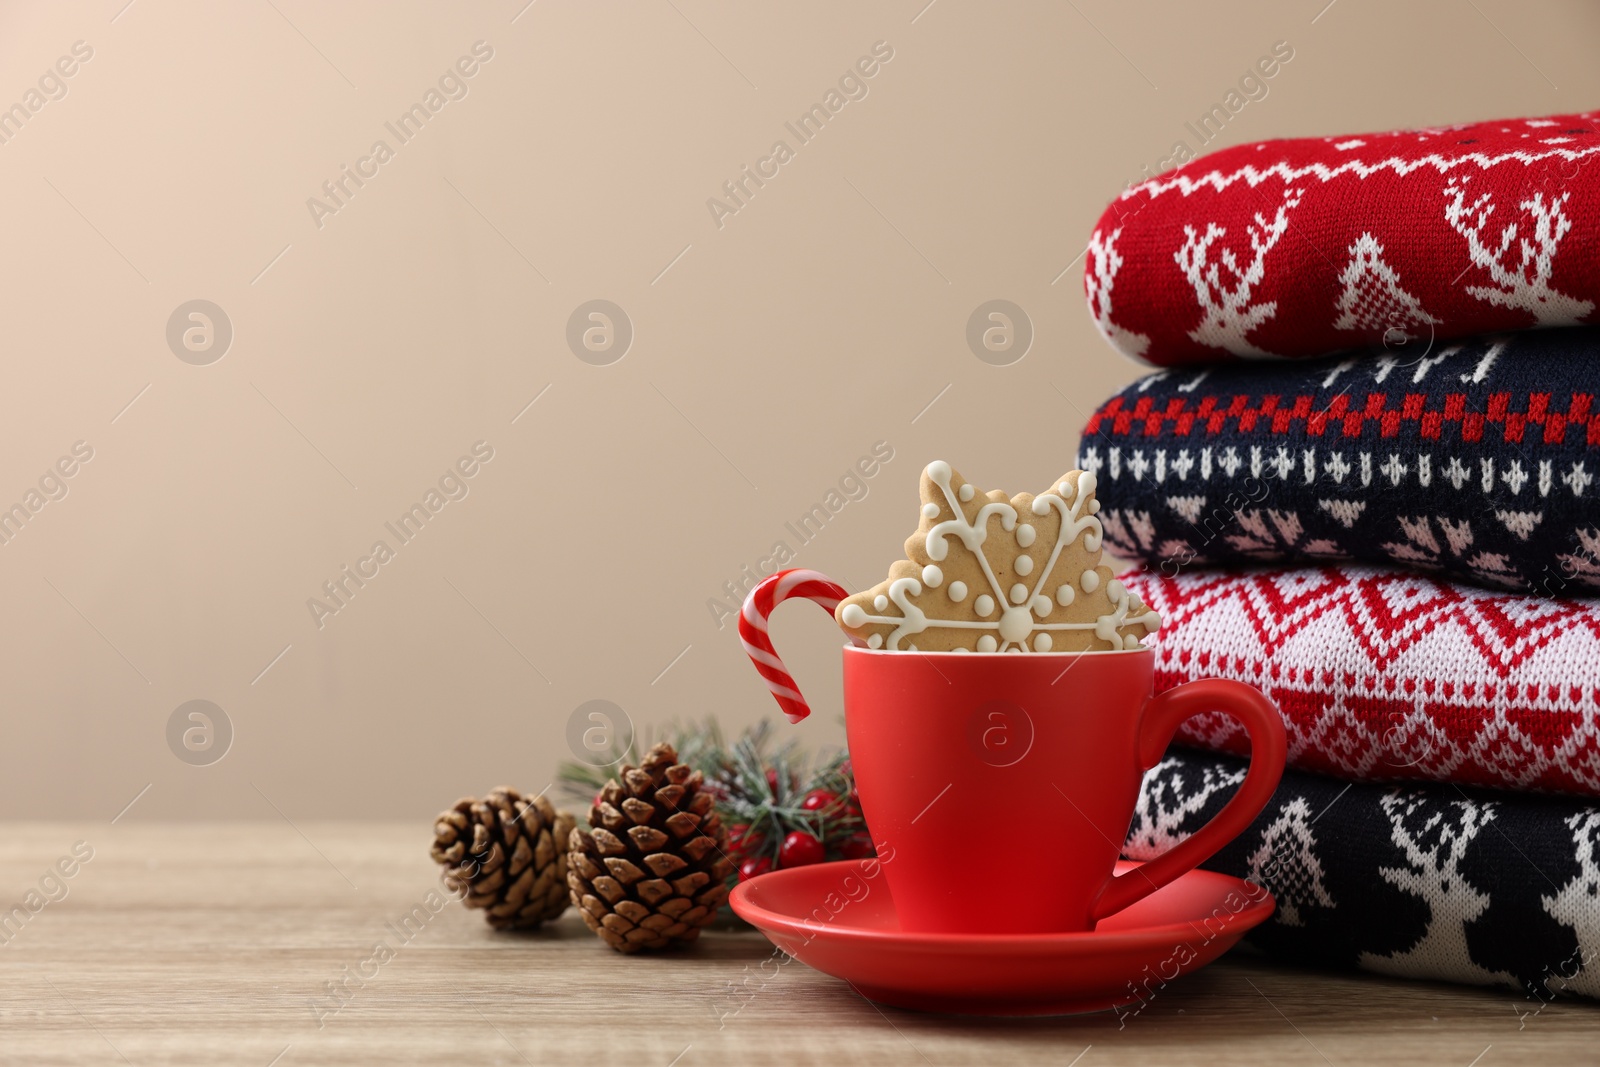 Photo of Stack of different Christmas sweaters, cup with candy cane, cookie and festive decor on wooden table, space for text